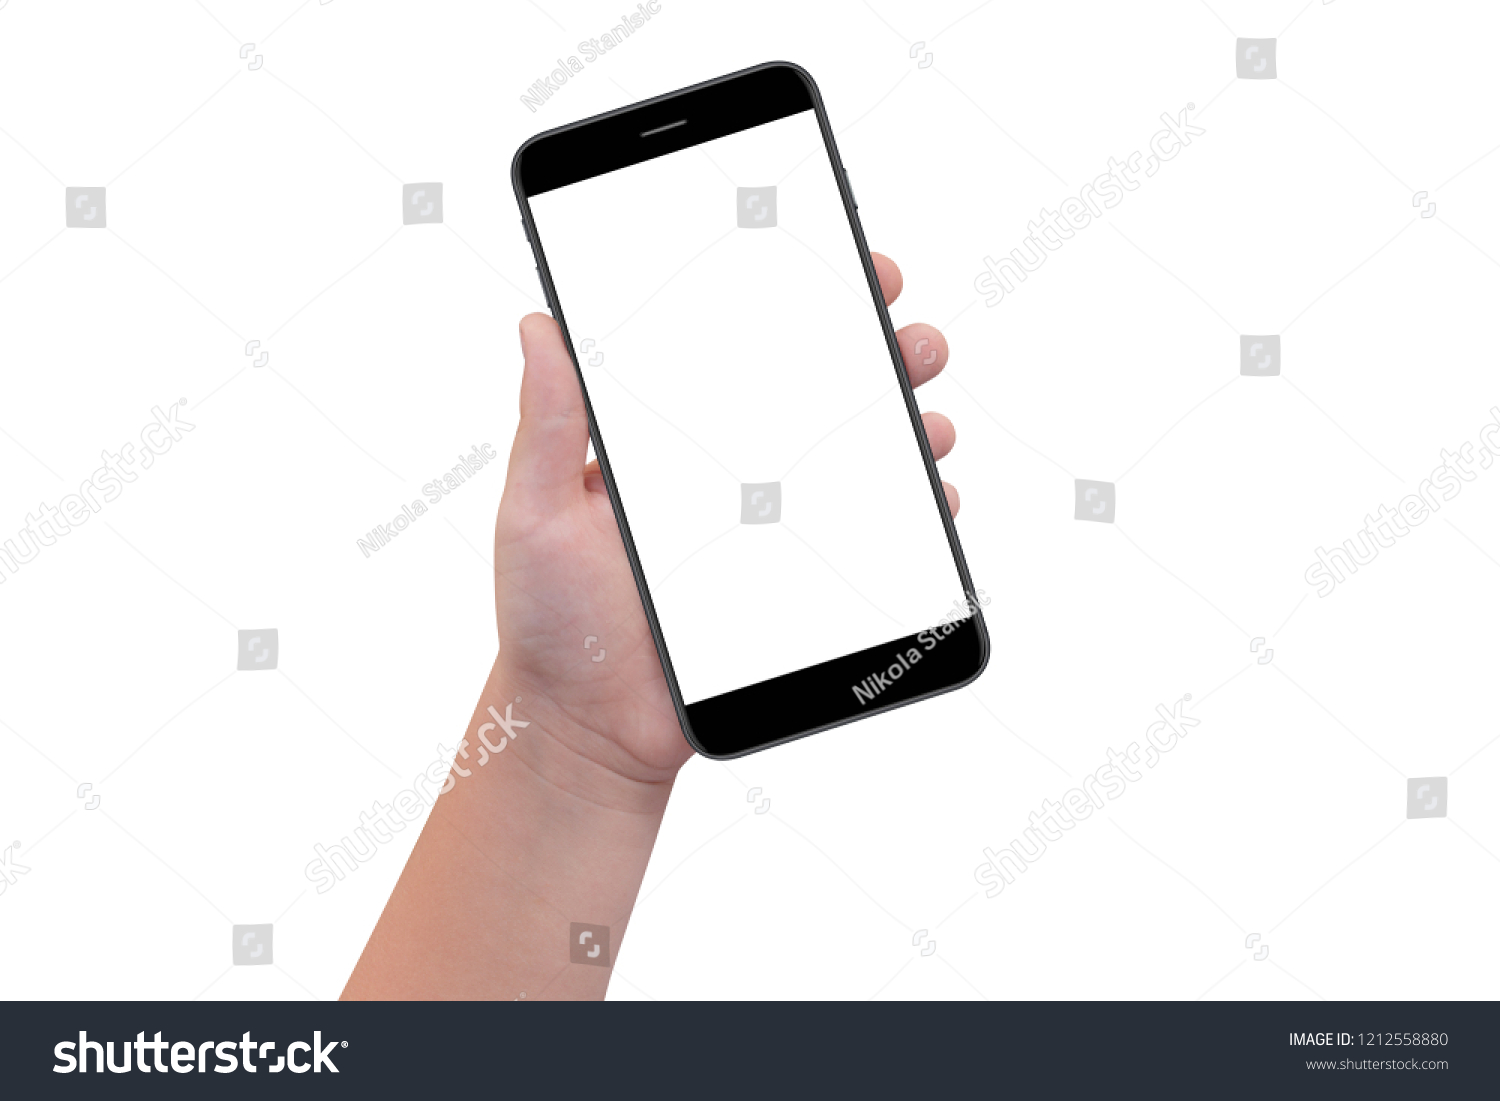 Boy hand holding white modern smartphone with empty screen, isolated on white background. Mockup #1212558880